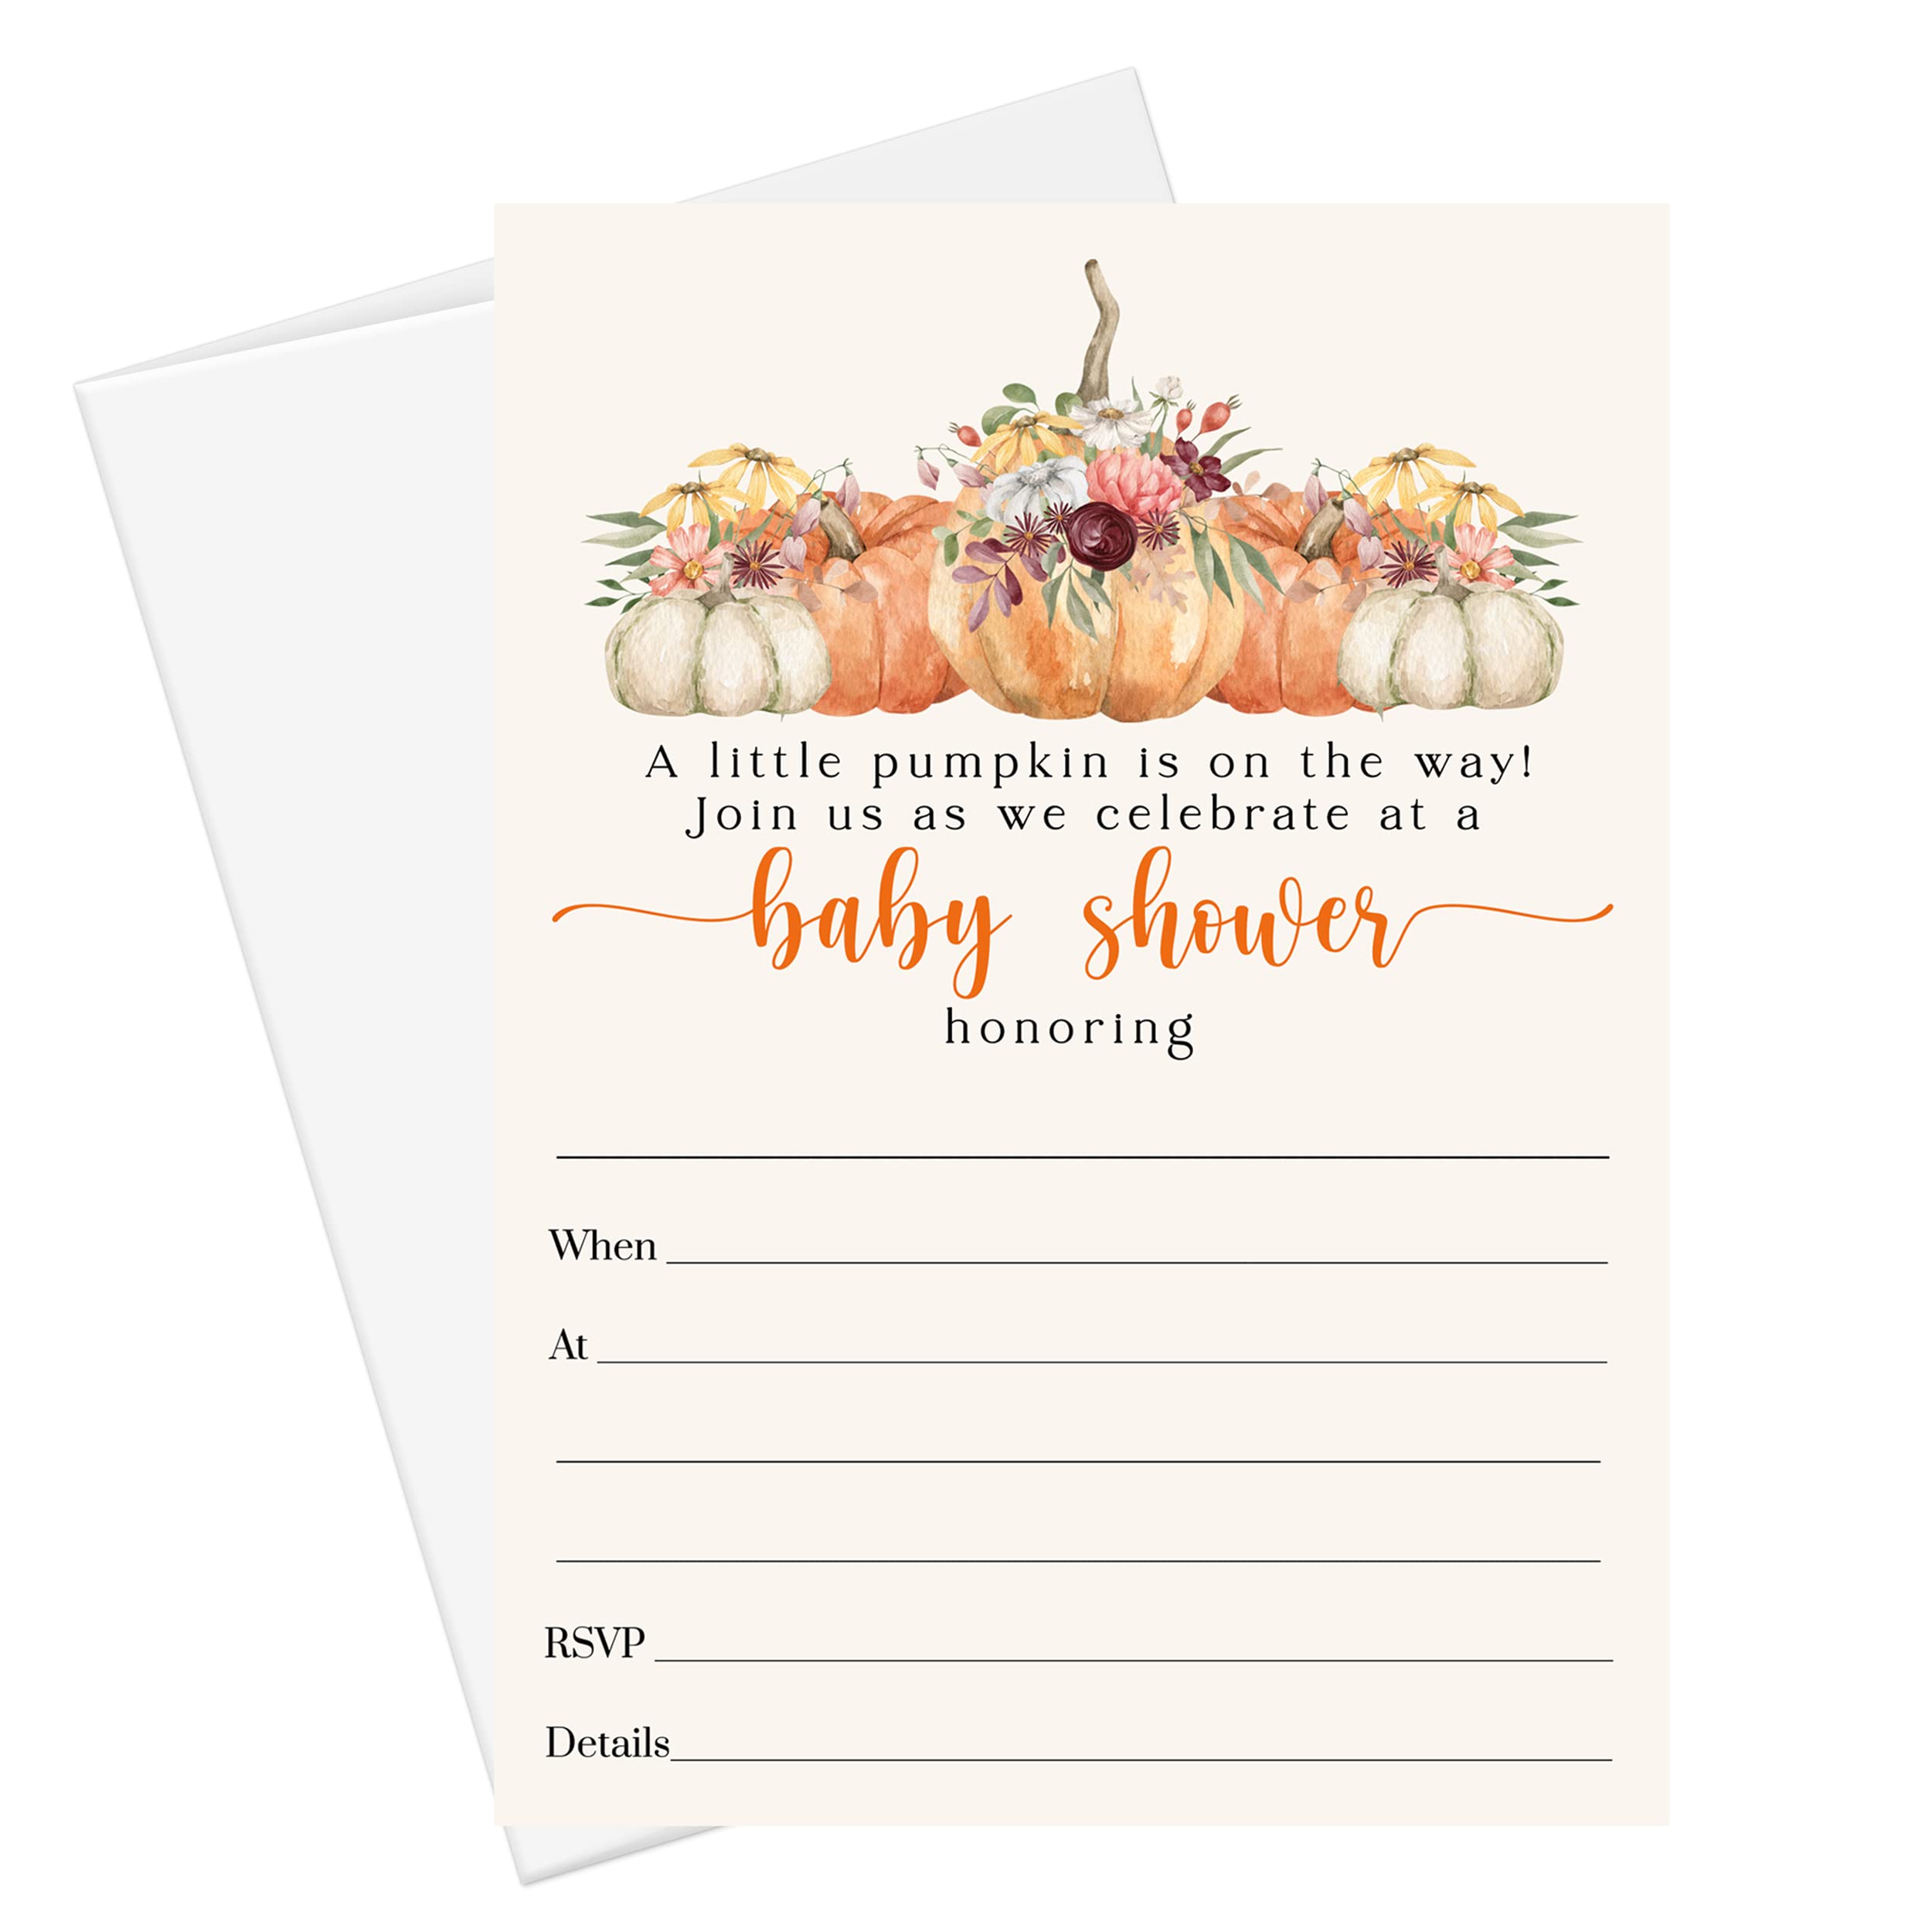 Paper Clever Party Little Pumpkin Baby Shower Invitations and Envelopes 25 Pack Rustic Invite Fill-In Blank - Fall Gender Reveal Boys Girls Autumn Themed - Printed 5x7 Size Card Set